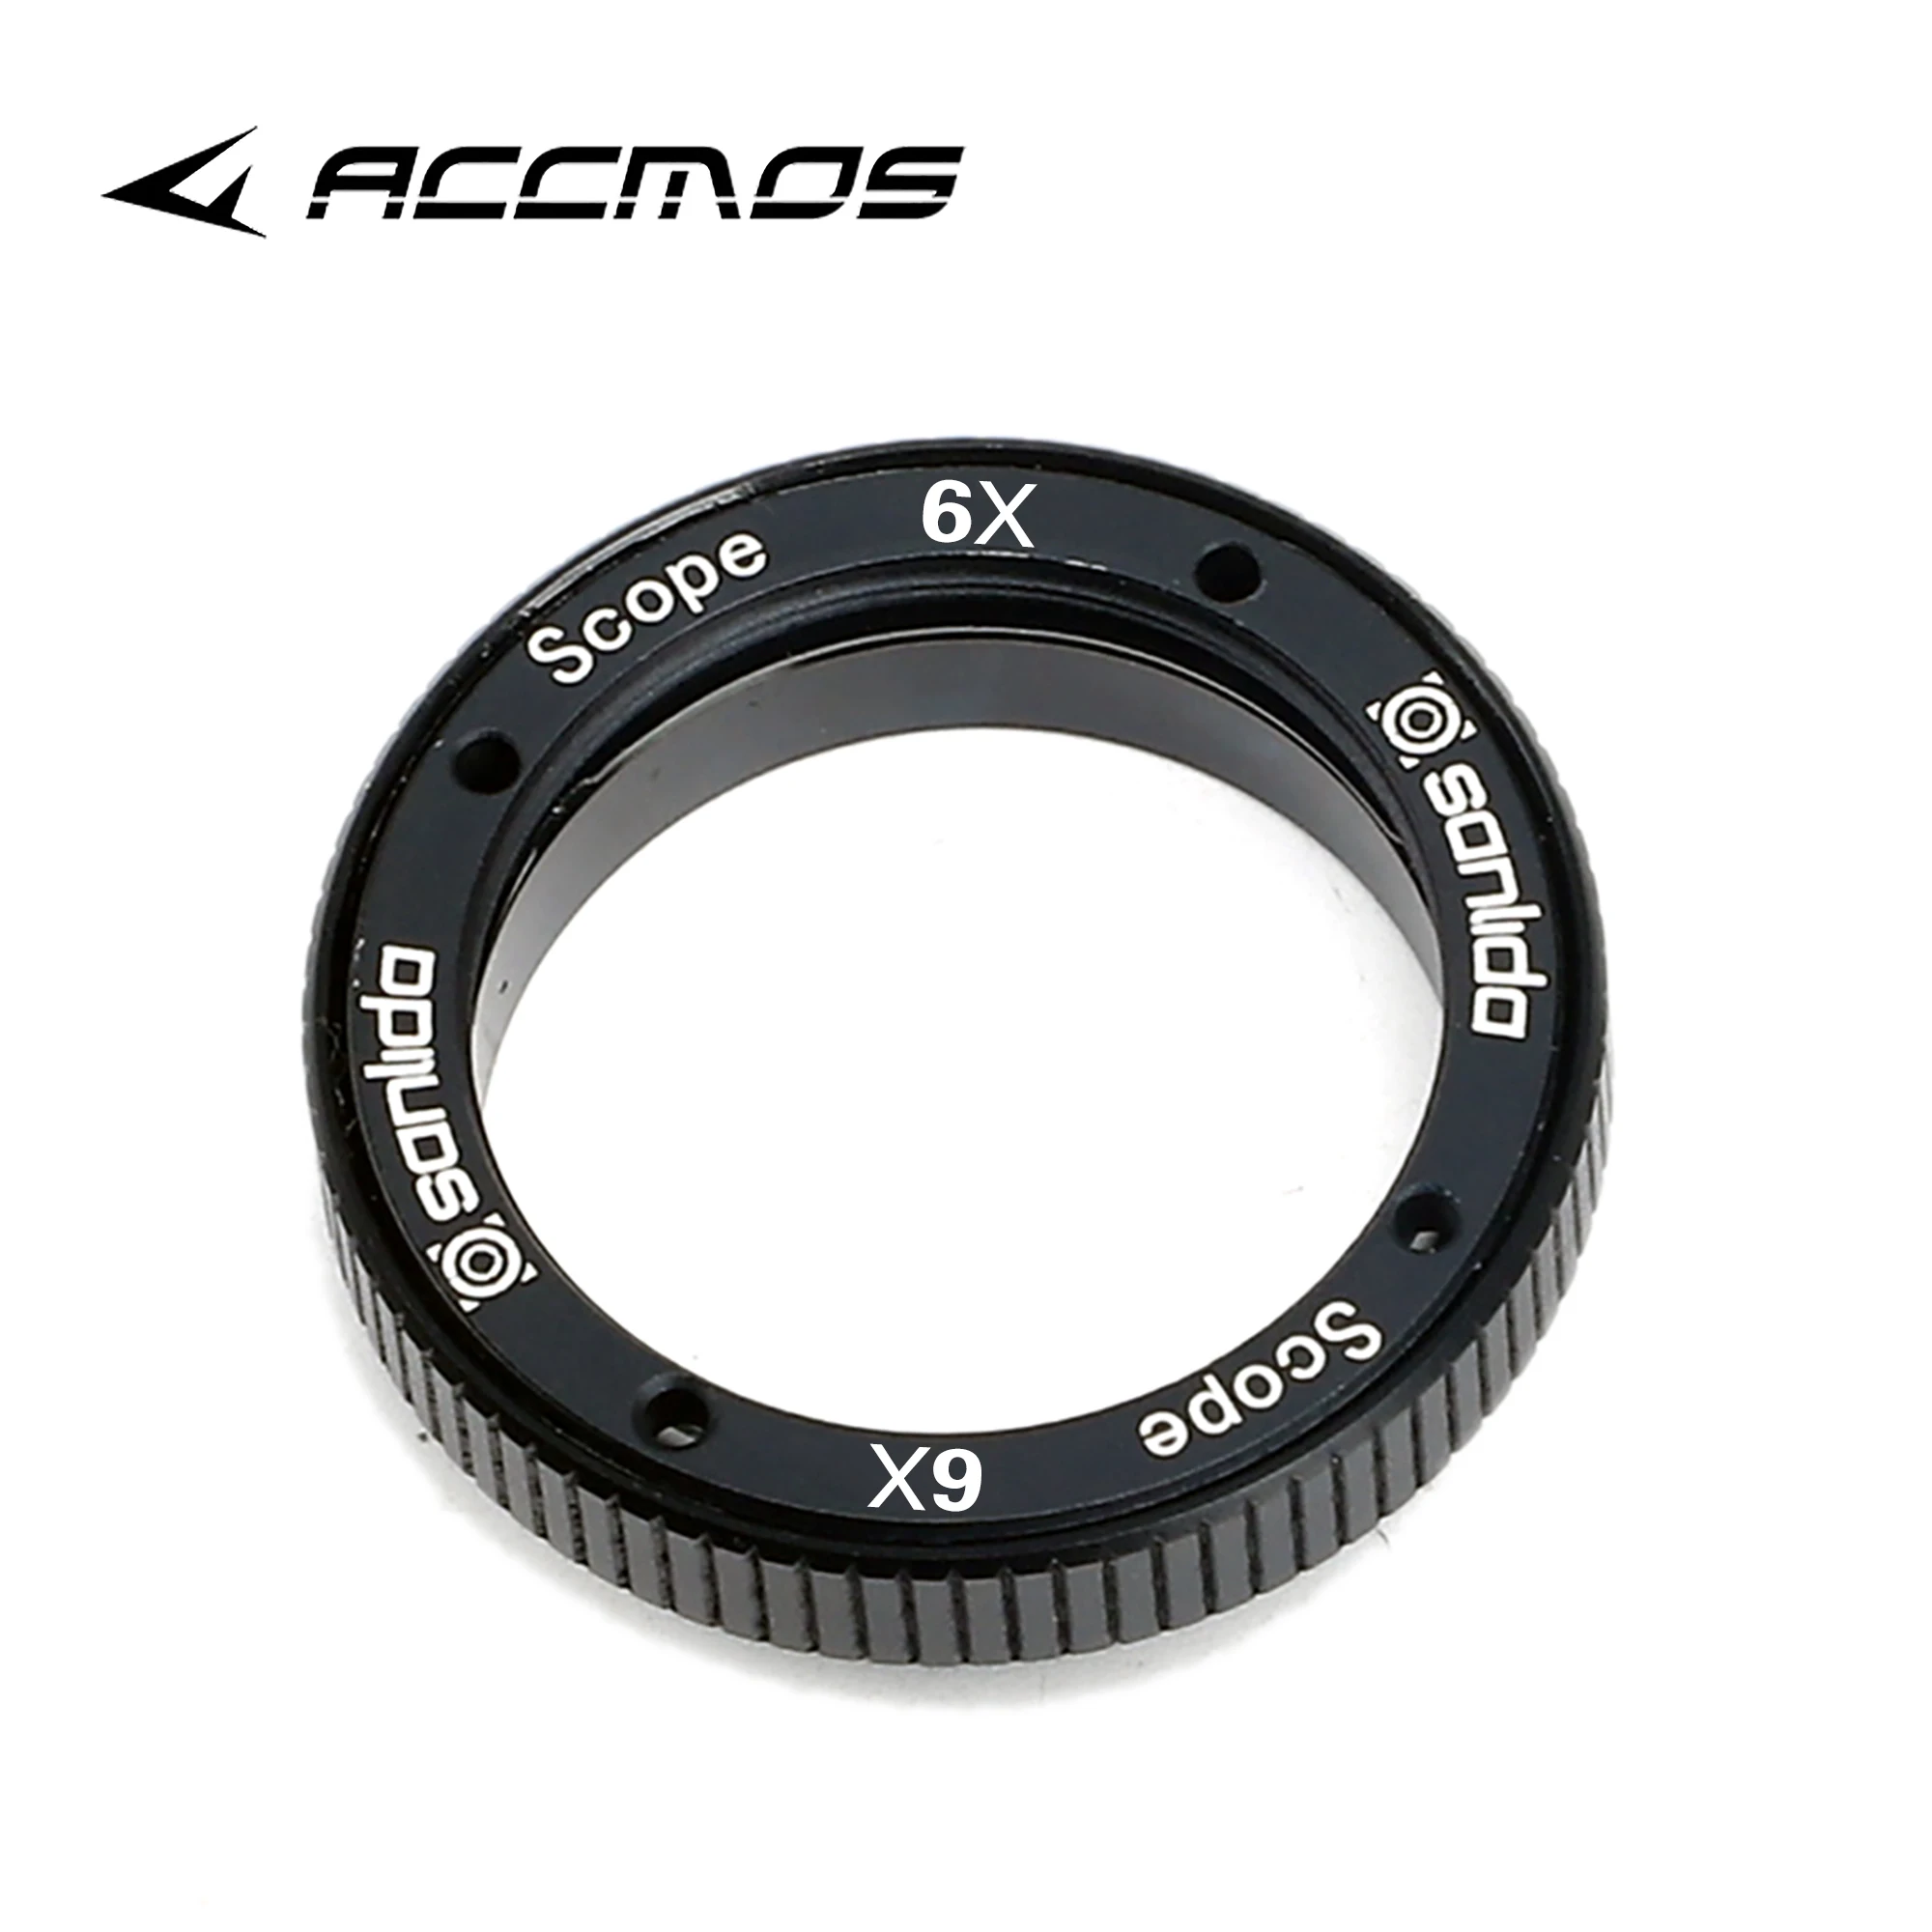 Sanlida Scope Lens 4X 6X 8X Magnified For X10 Compound Bow Sight Accuracy Target Or Field Archery Shooting